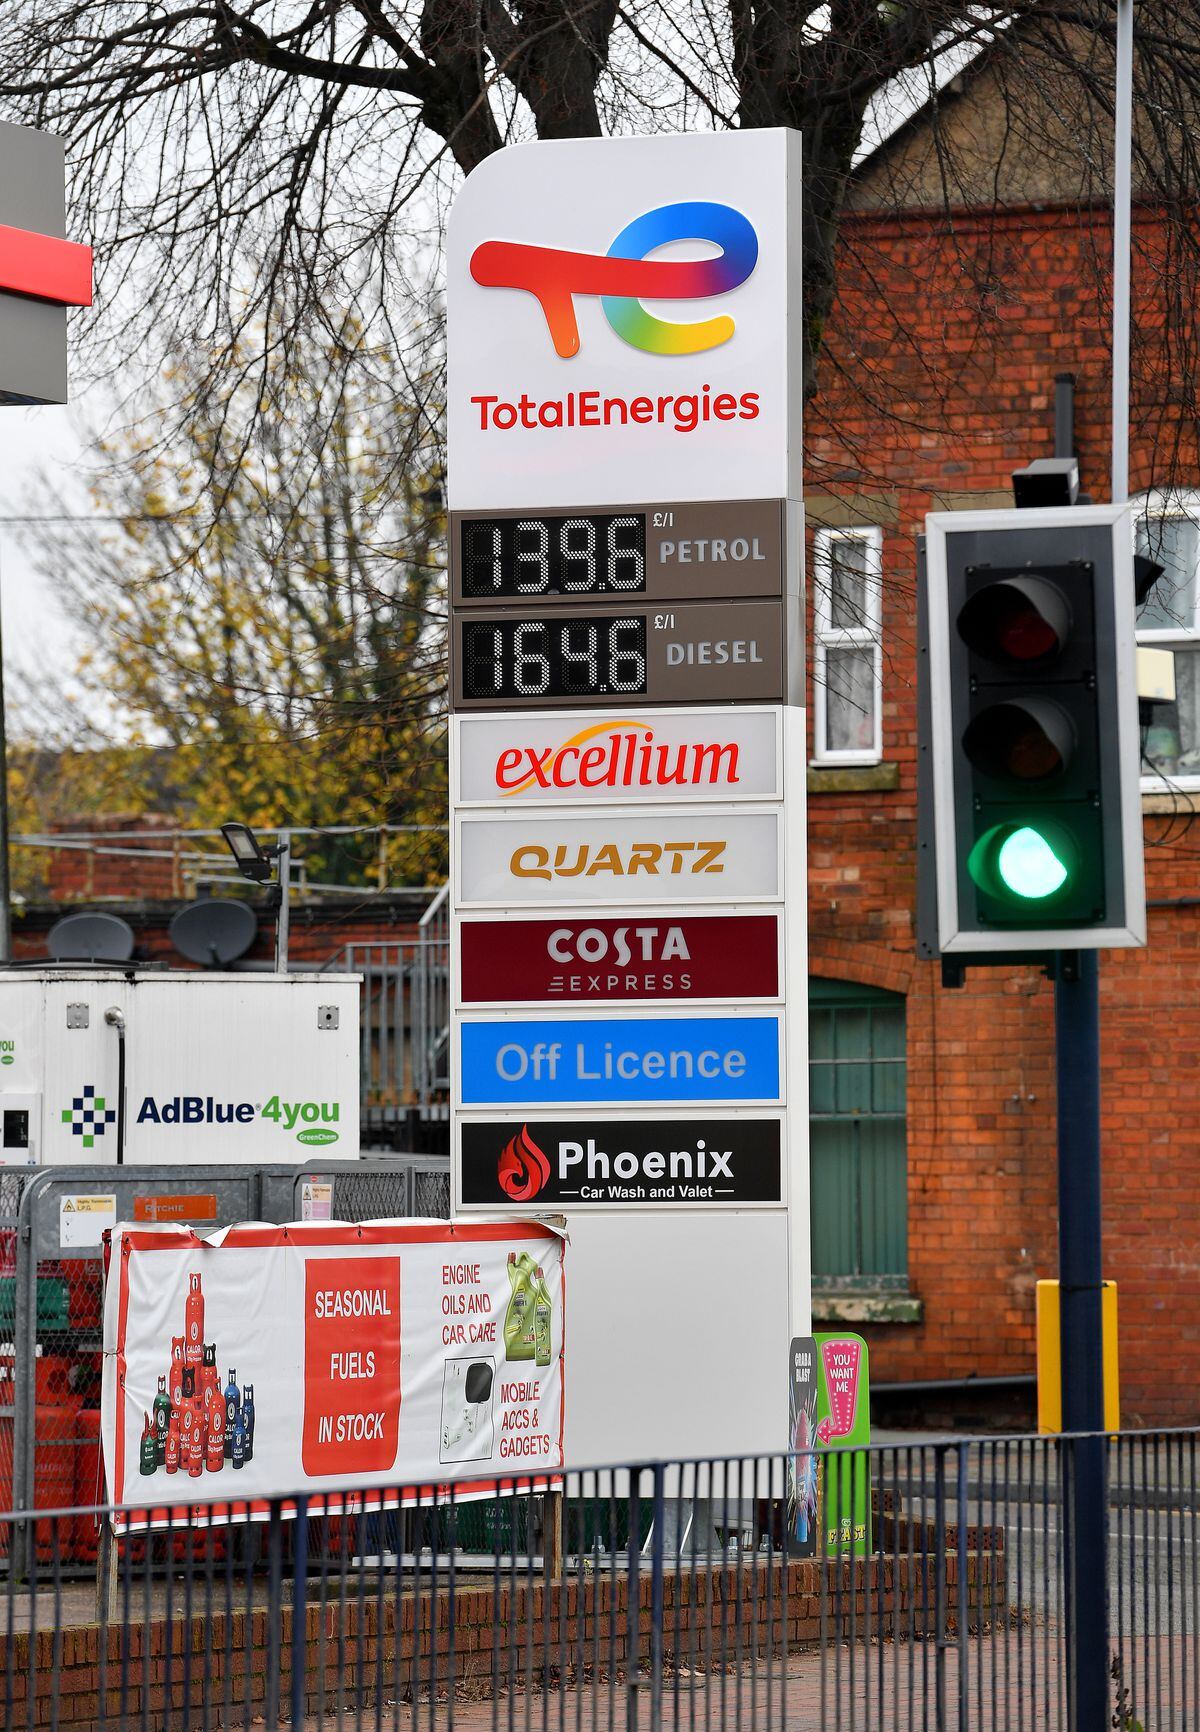 The forecourt's manager reckons the filling station is one of the UK's cheapest